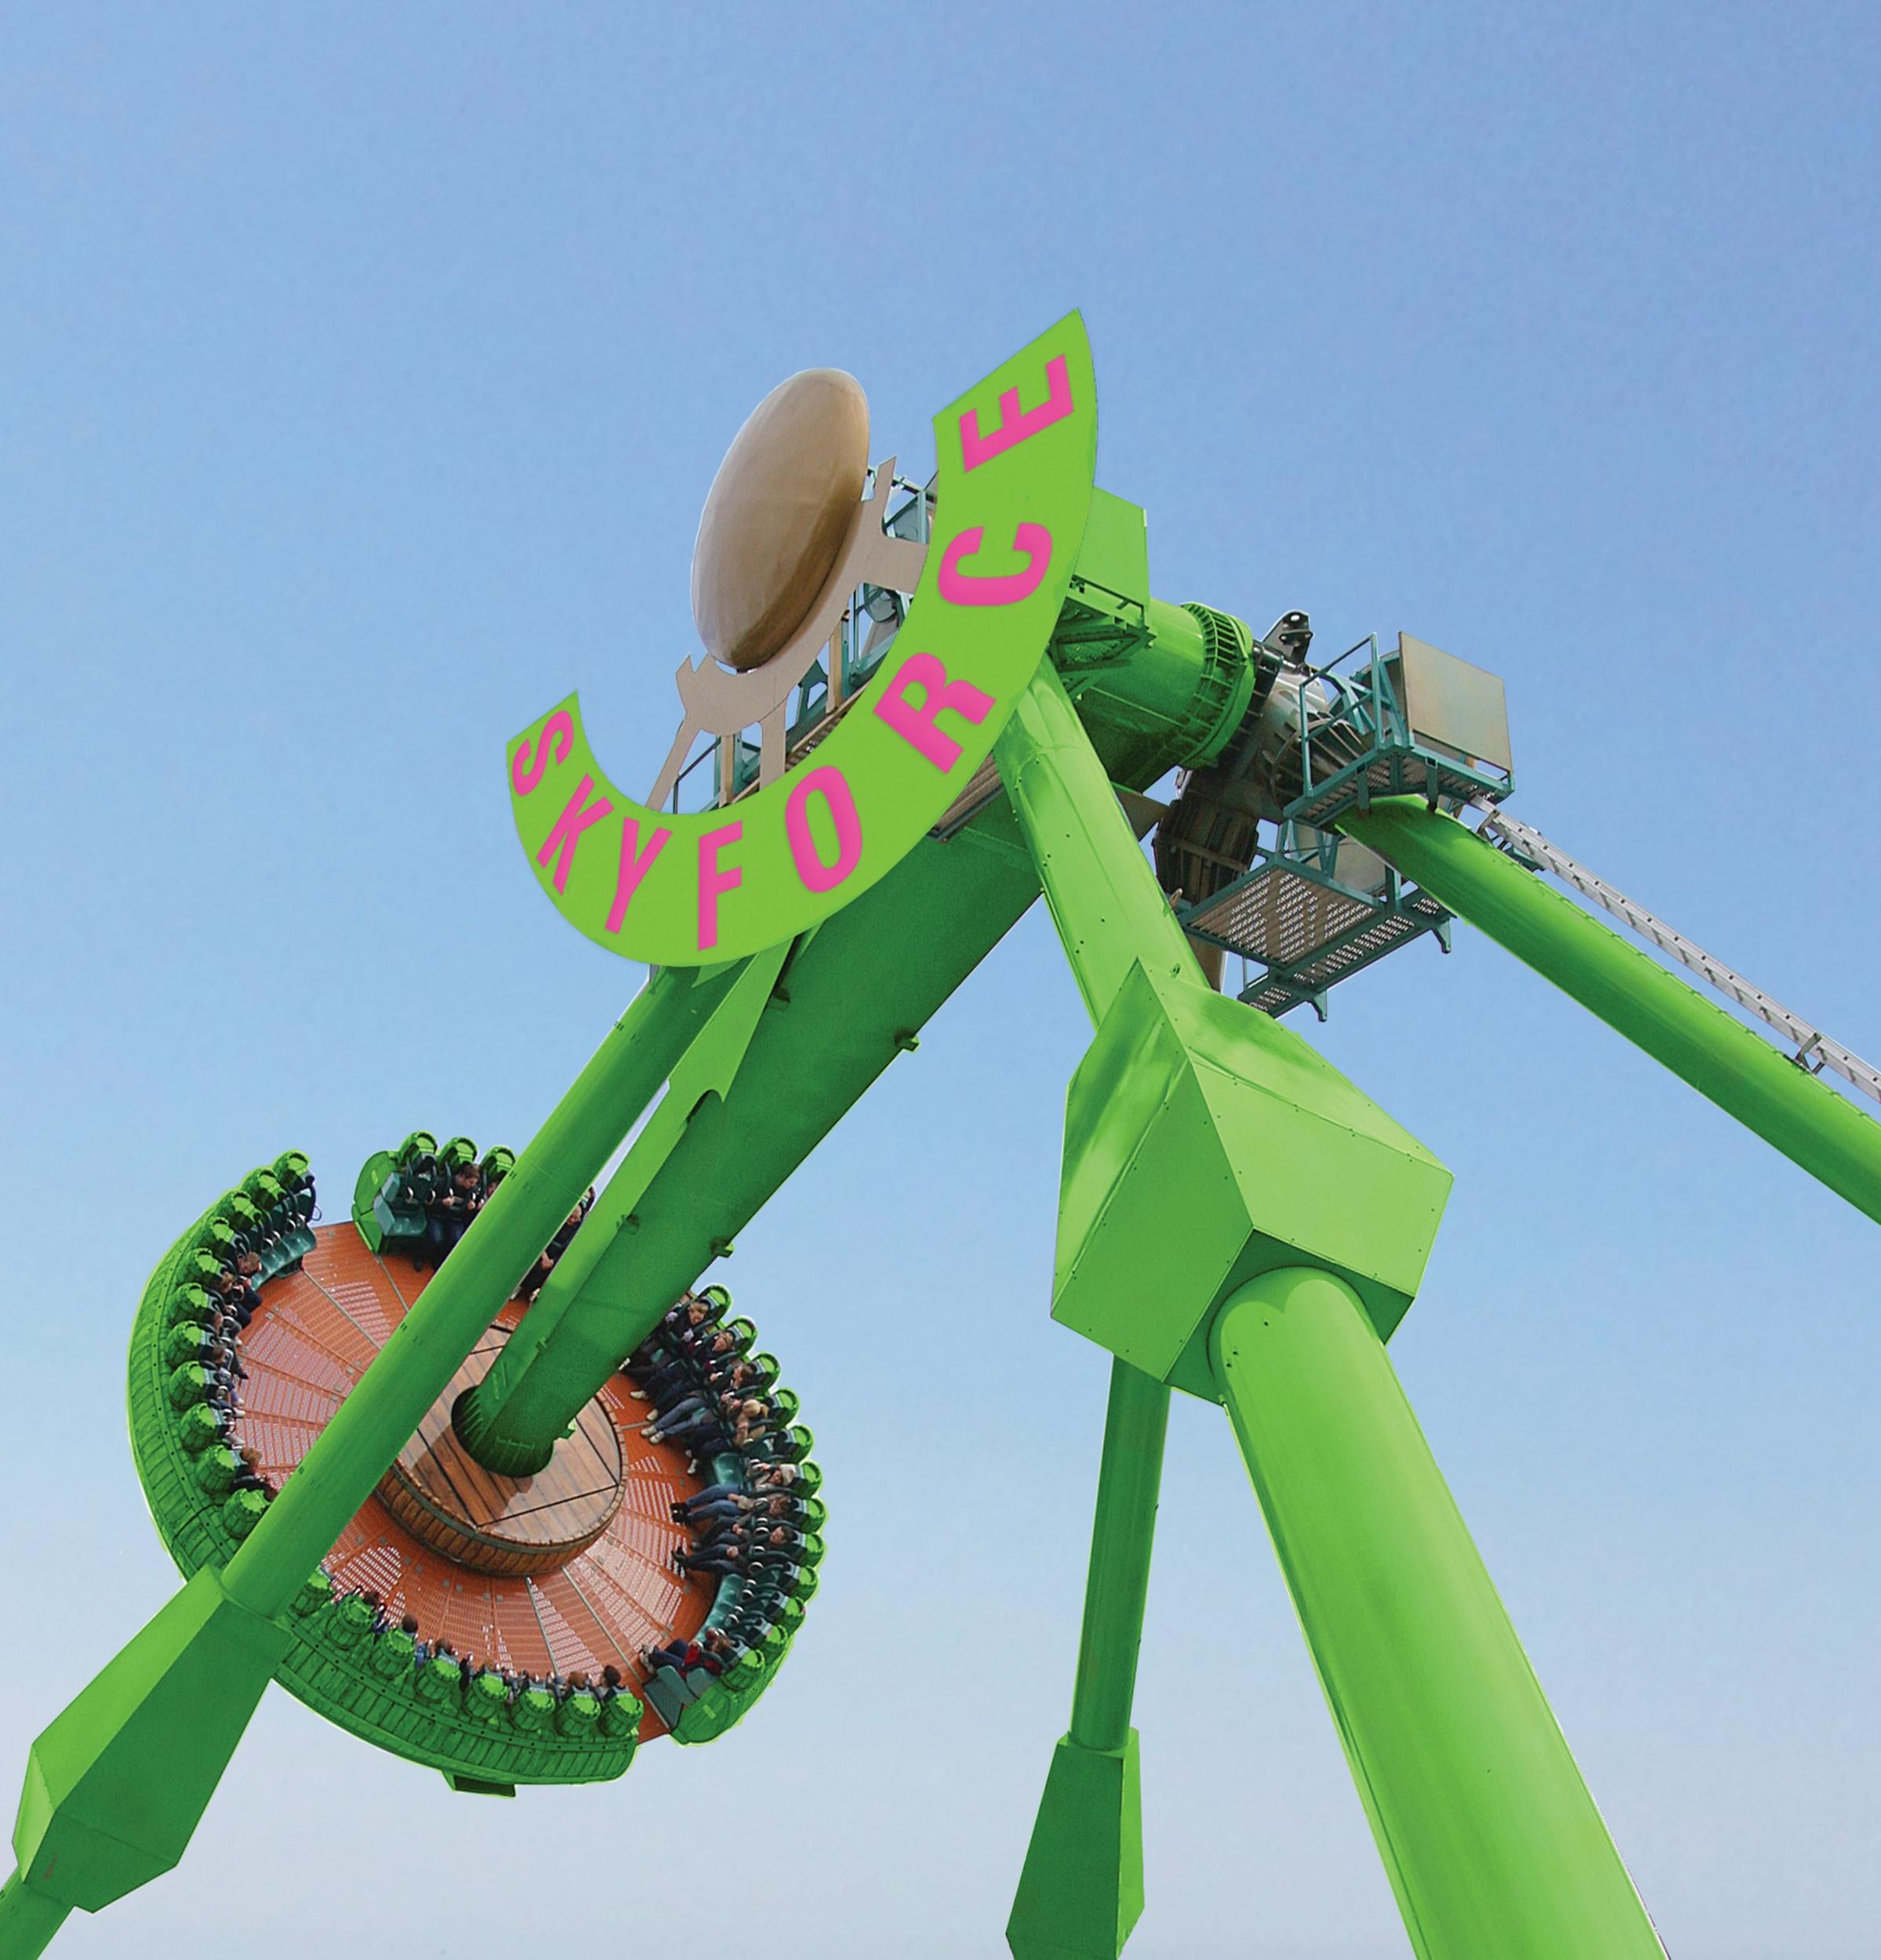 Sky-Force is the new ride on the block at Flambards